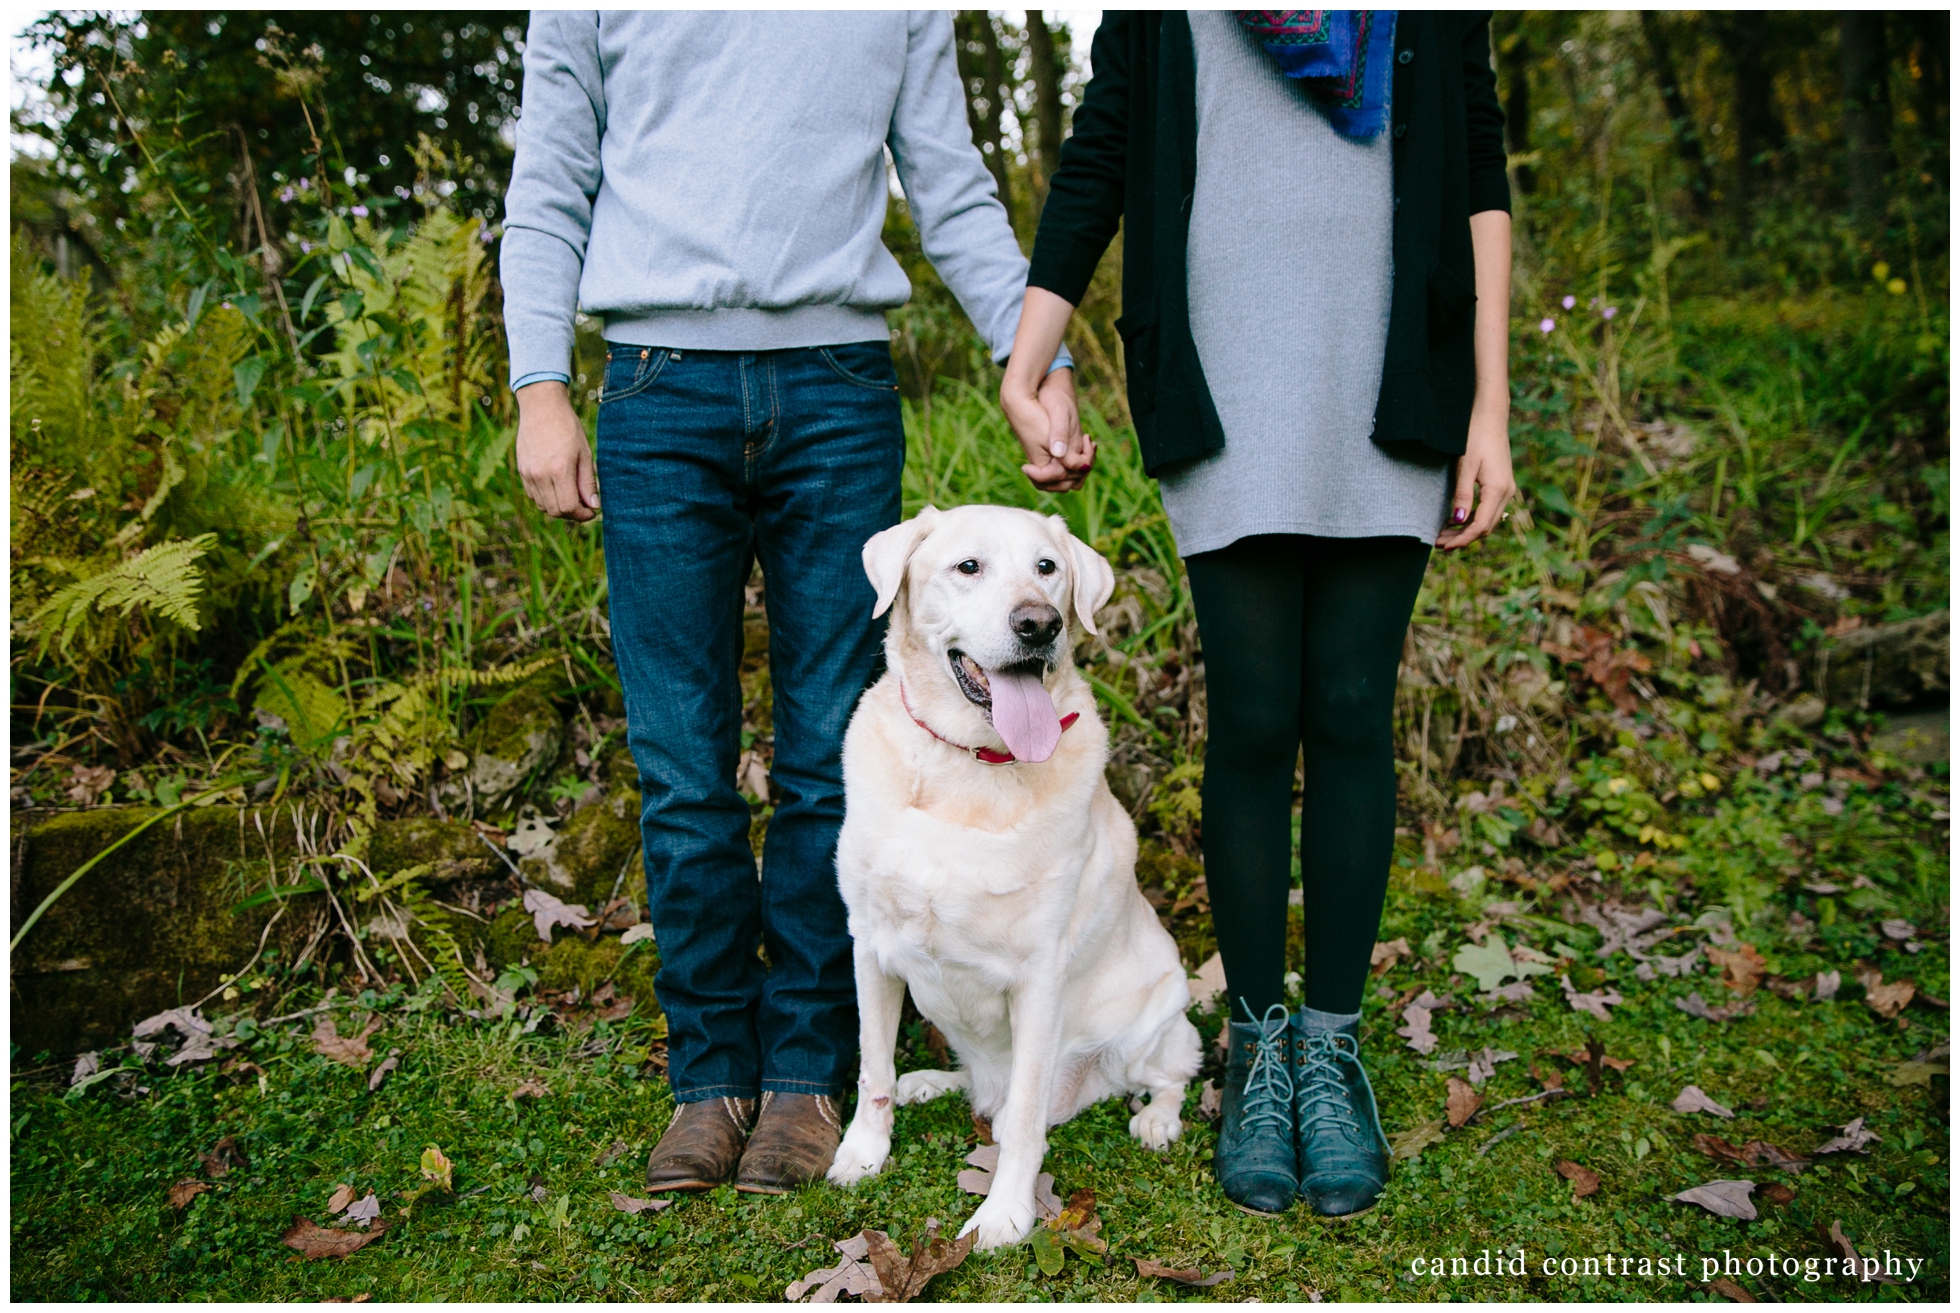 outdoor dubuque iowa engagement photos with dog, iowa wedding photographer candid contrast photography 